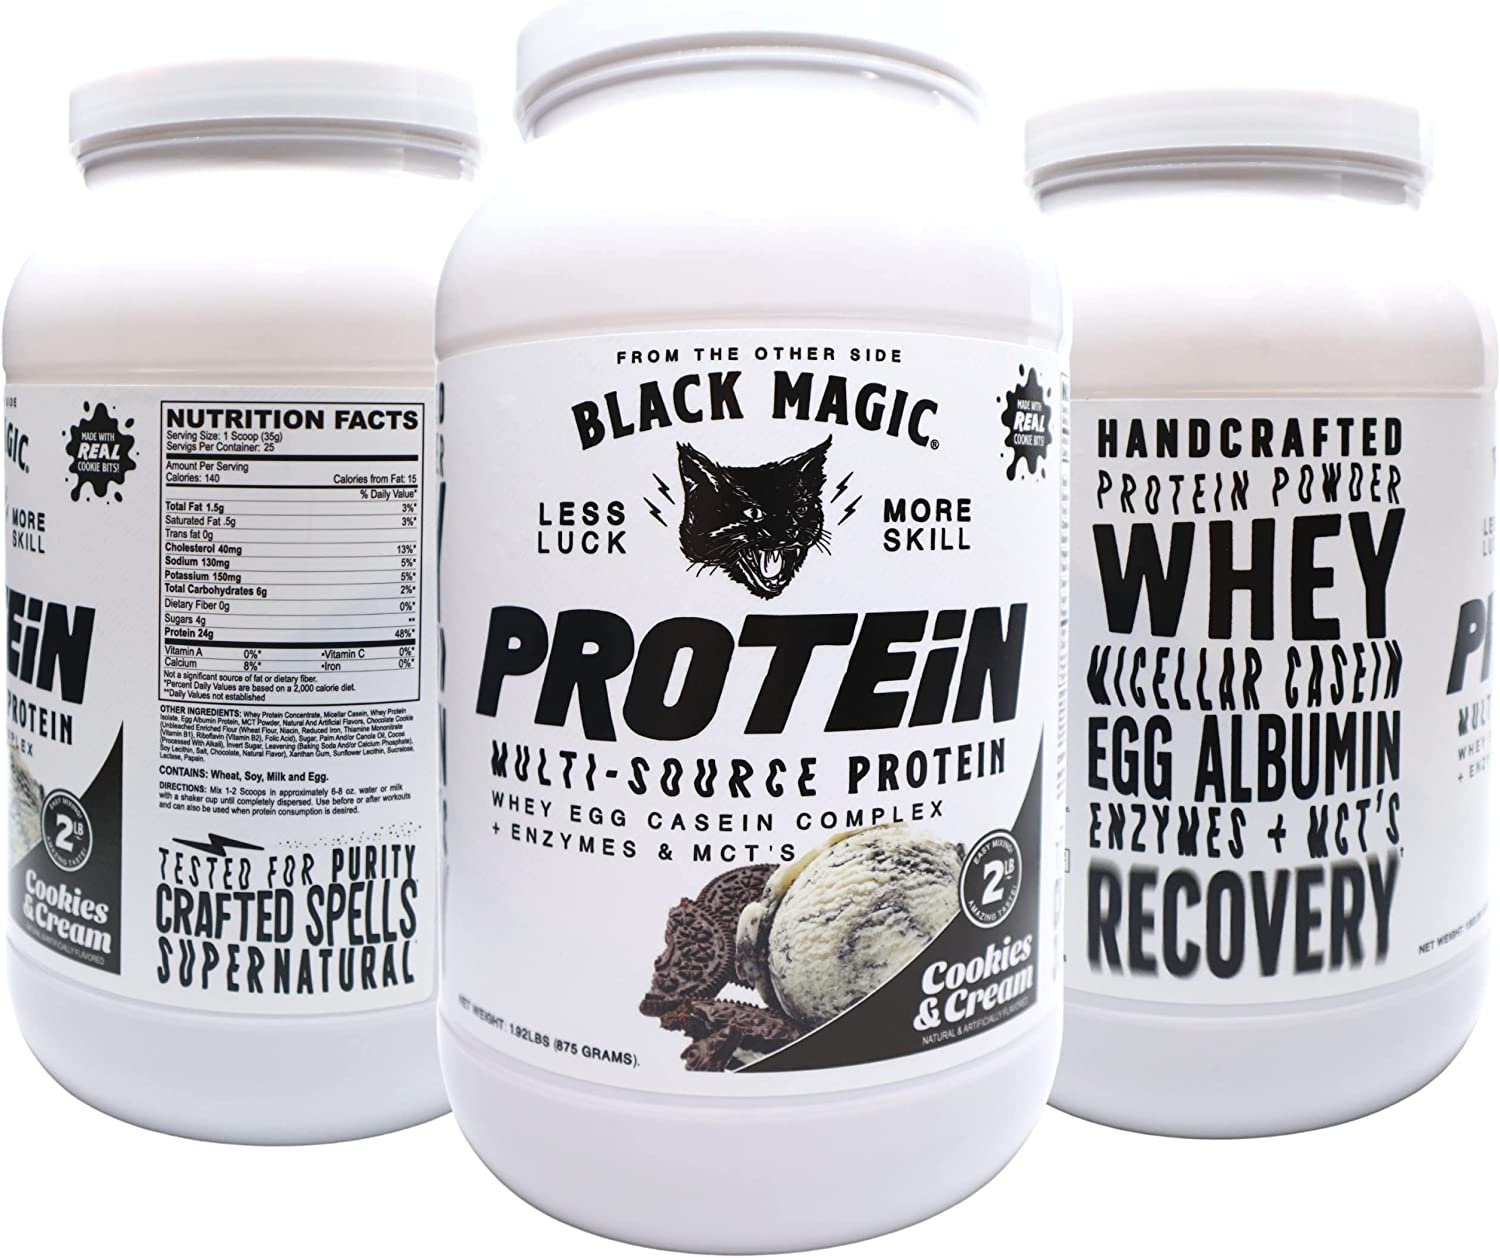 Black Magic Multi-Source Protein - Whey, Egg, and Casein Complex with Enzymes & MCT Powder - Pre Workout and Post Workout - Cookies and Cream Protein Powder - 24g Protein - 2 LB with Bonus Key Chain